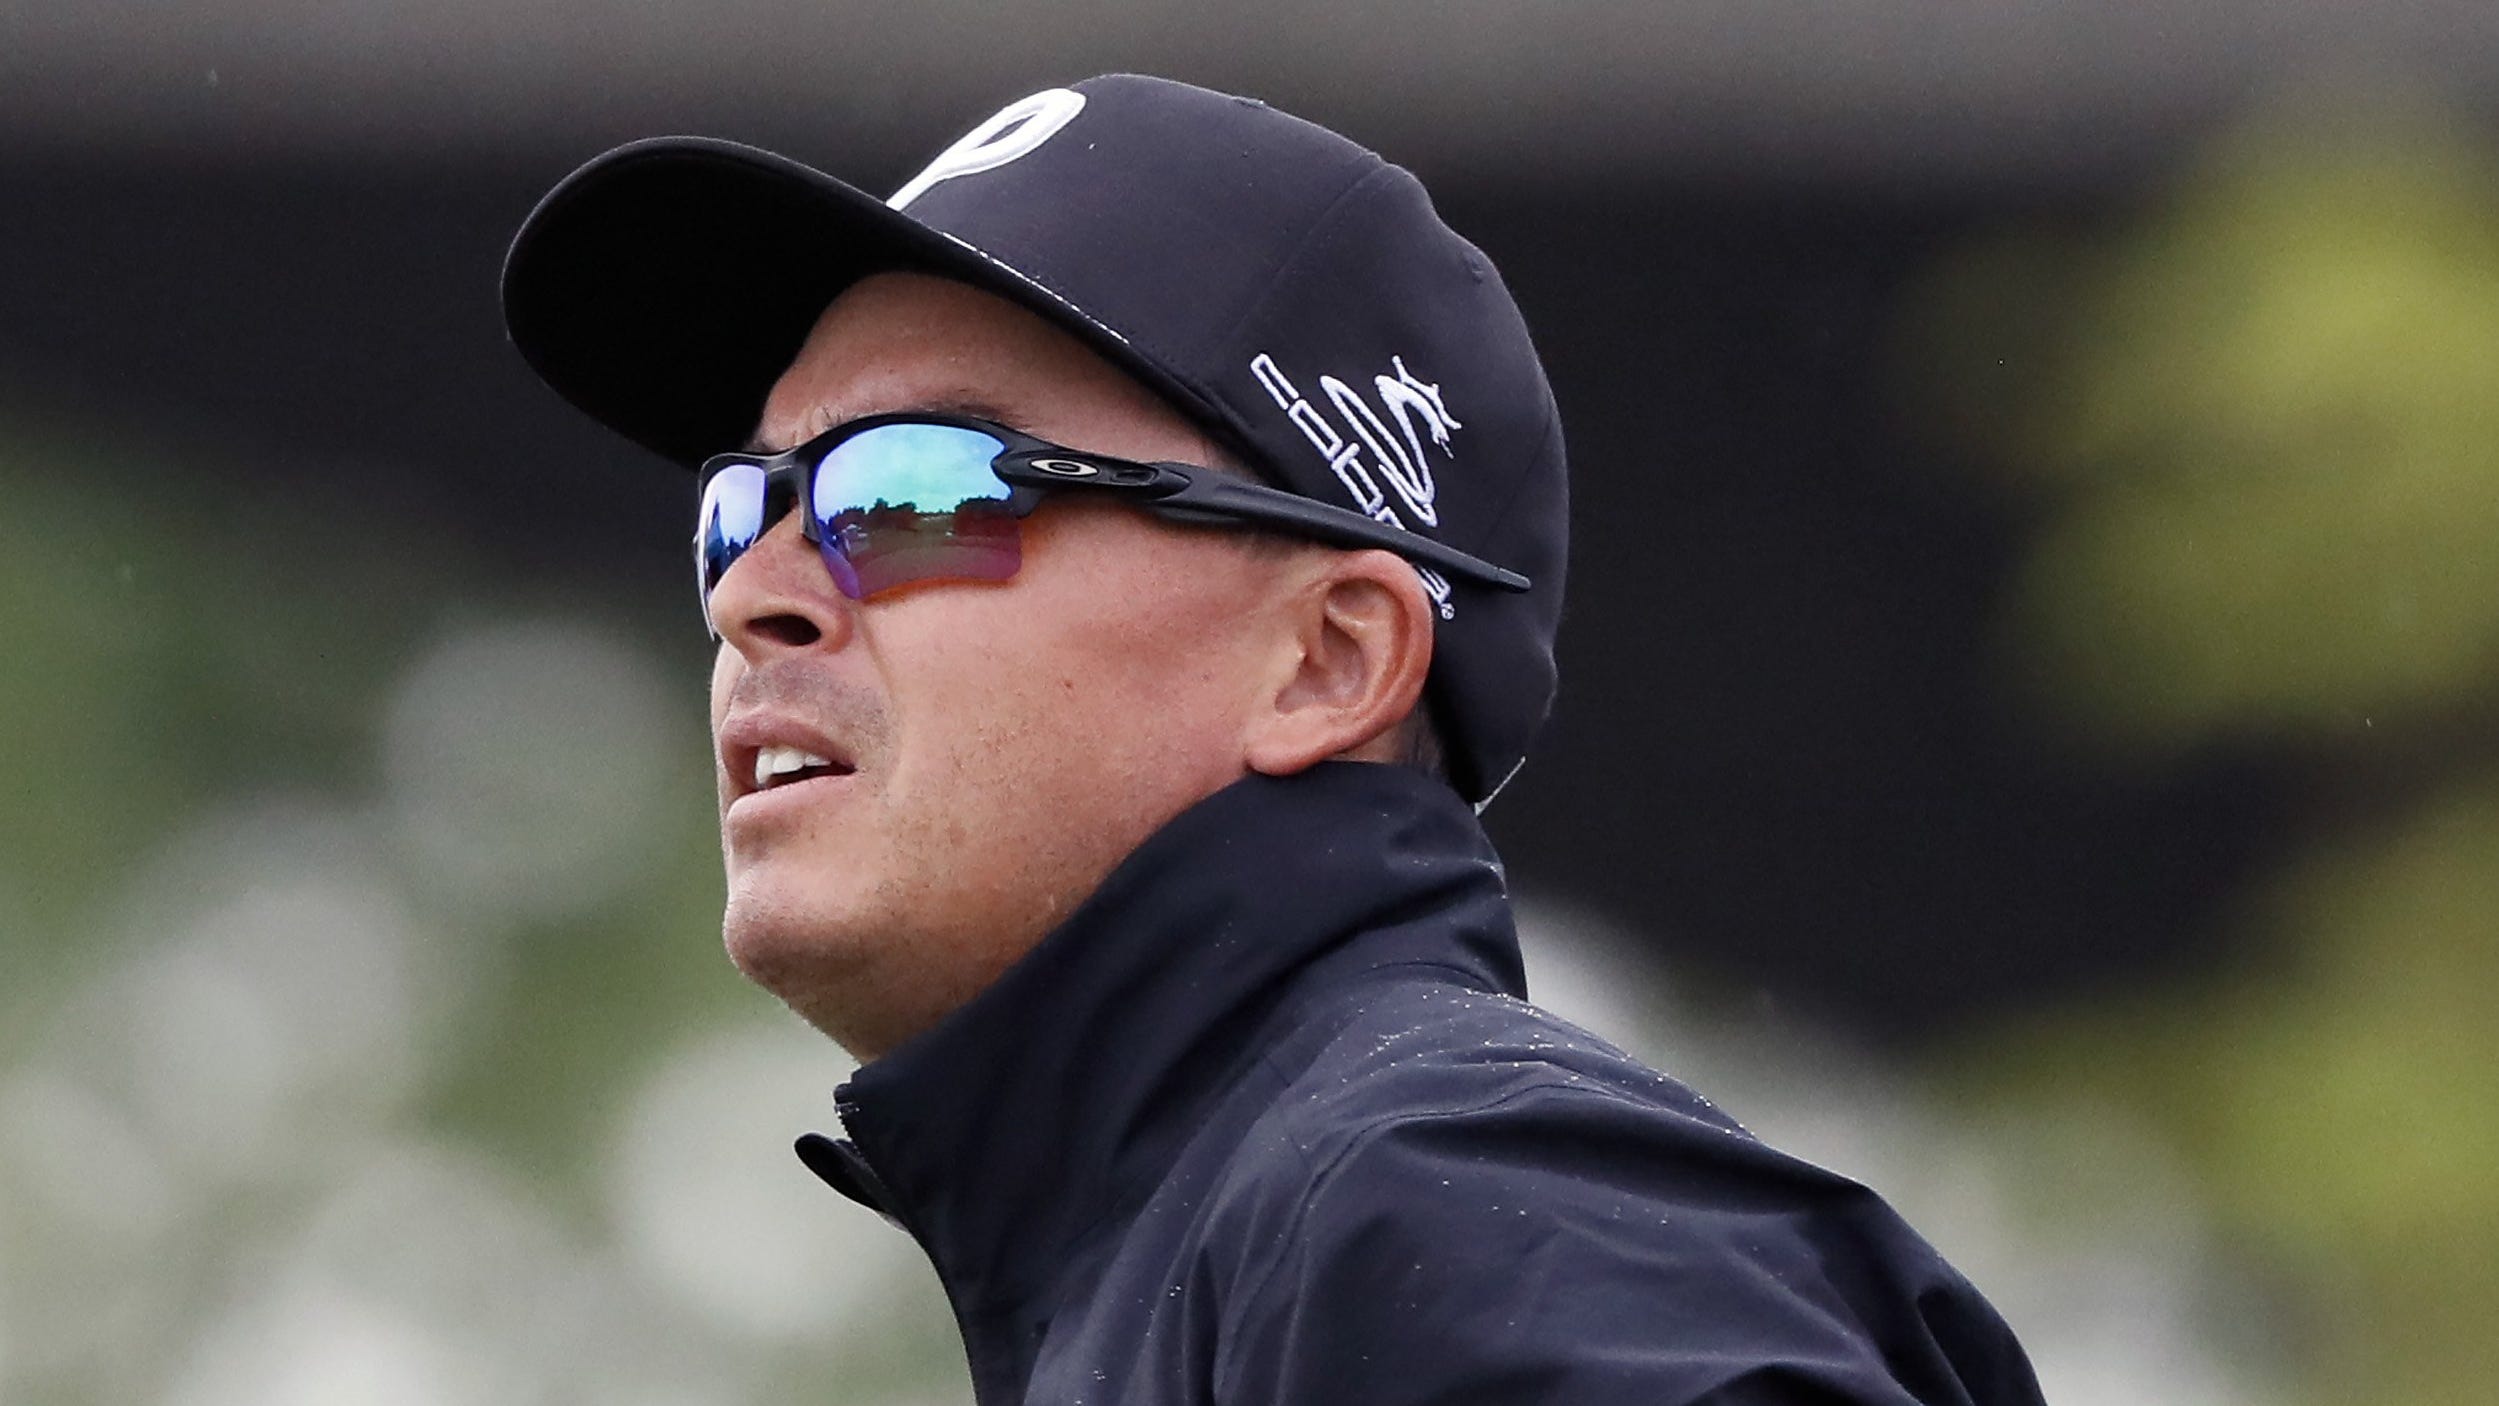 PGA Tour player Rickie Fowler adds frames to his golf game.